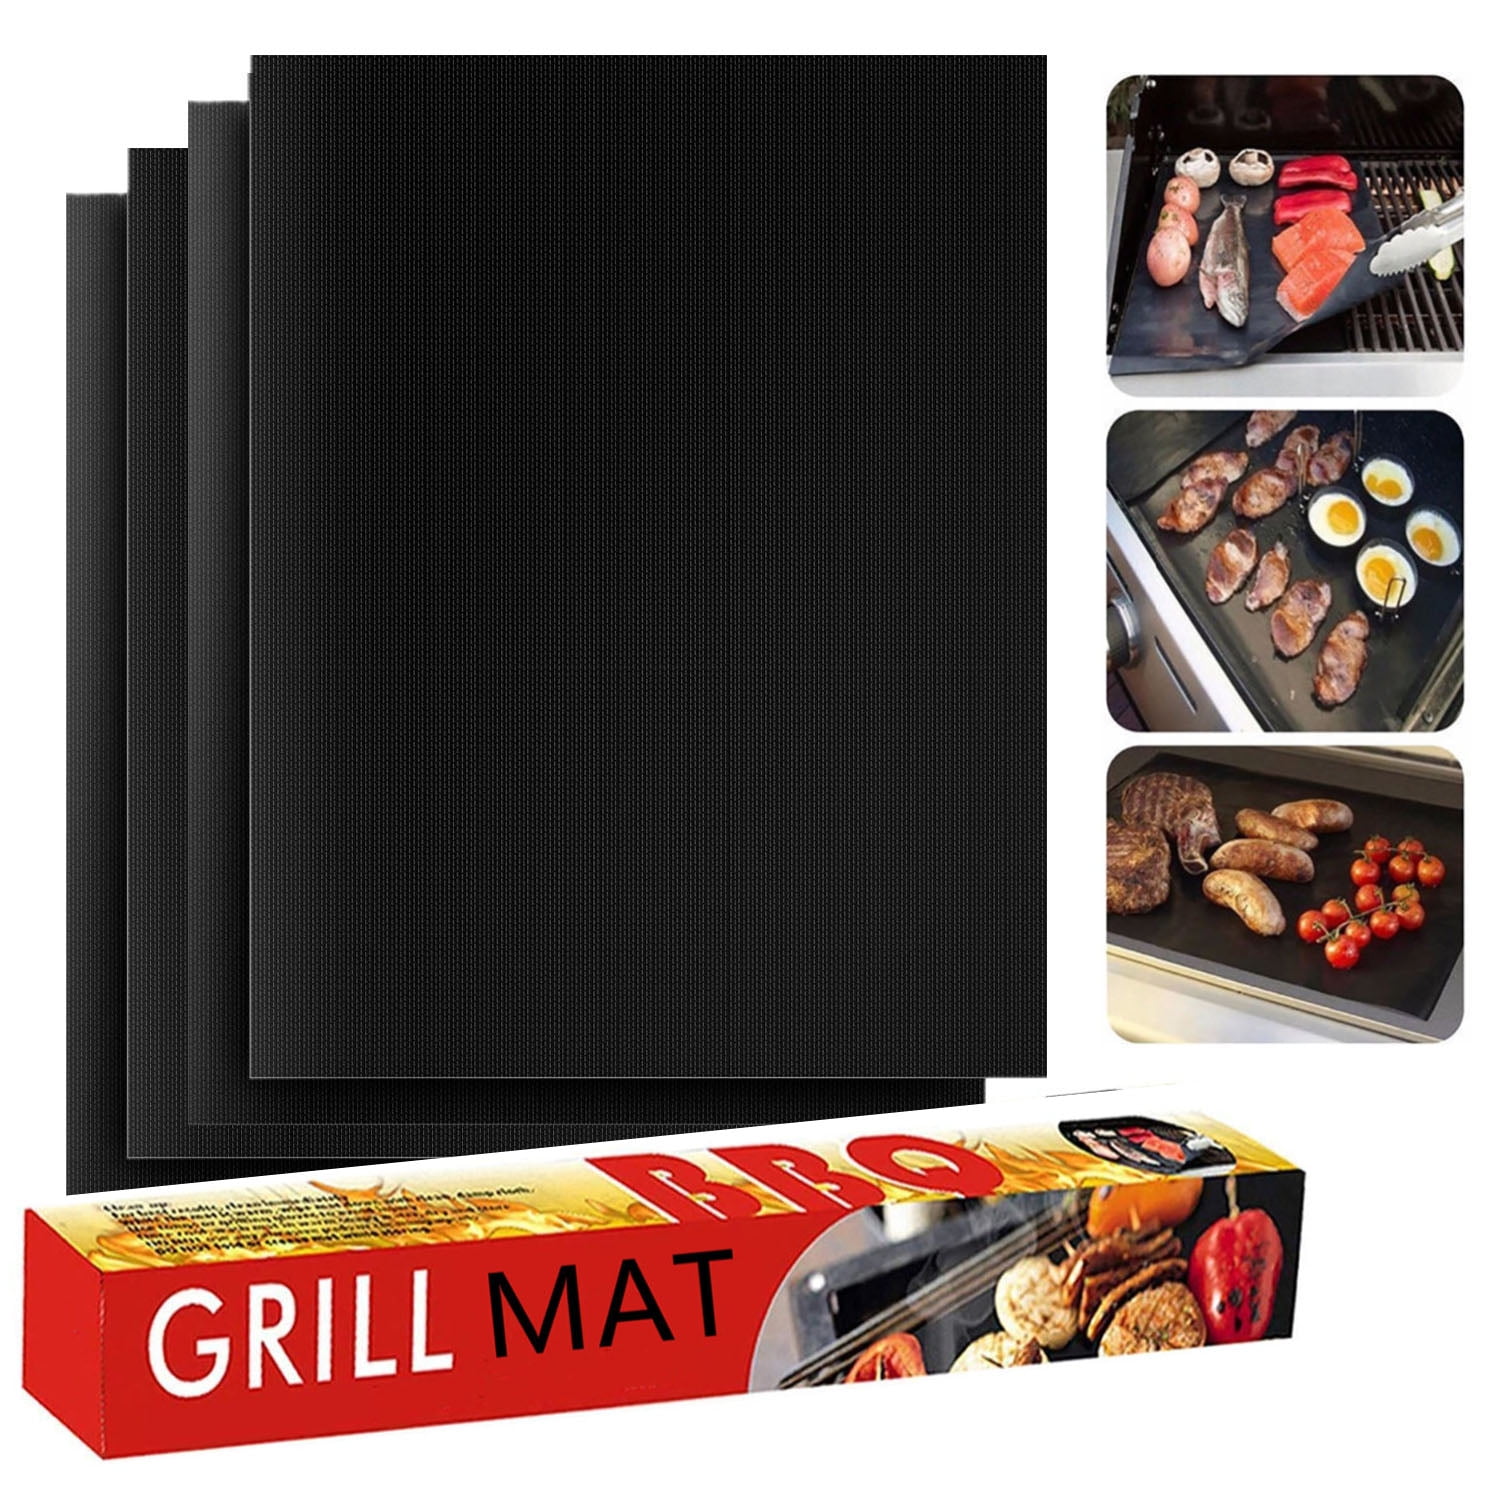 Grill Mat Reusable,Easy to Clean Set of 5 Non Stick BBQ Grill Mats 